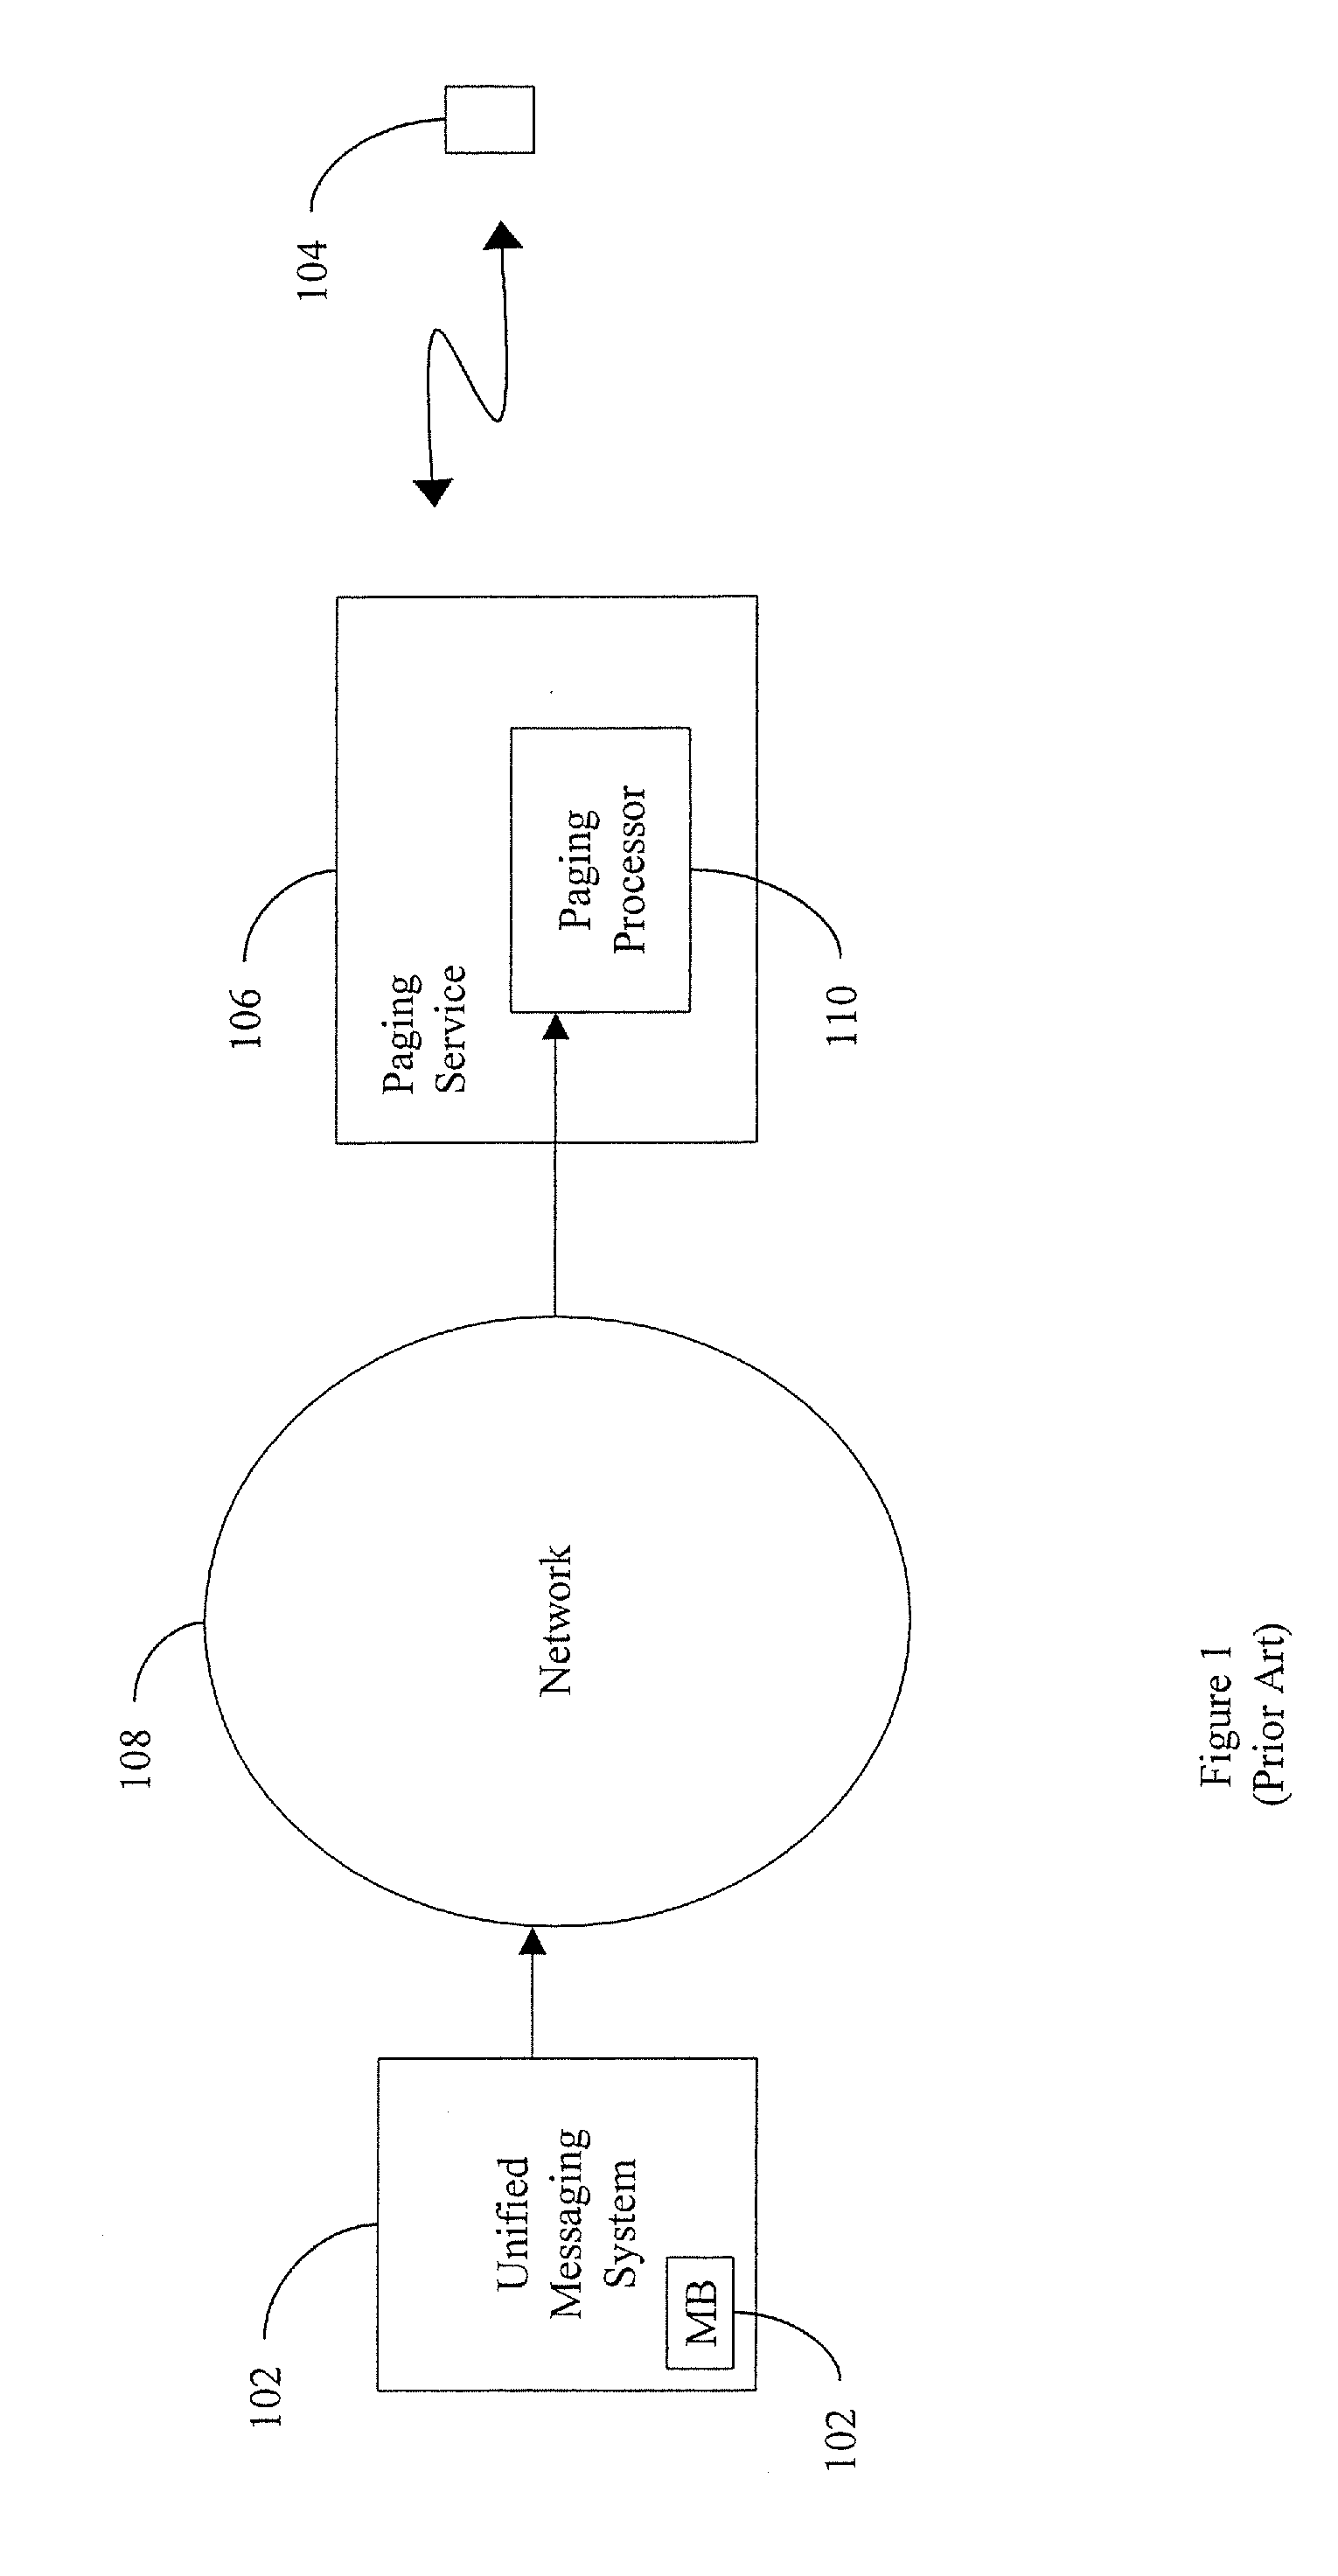 System and method for monitoring commercial transactions